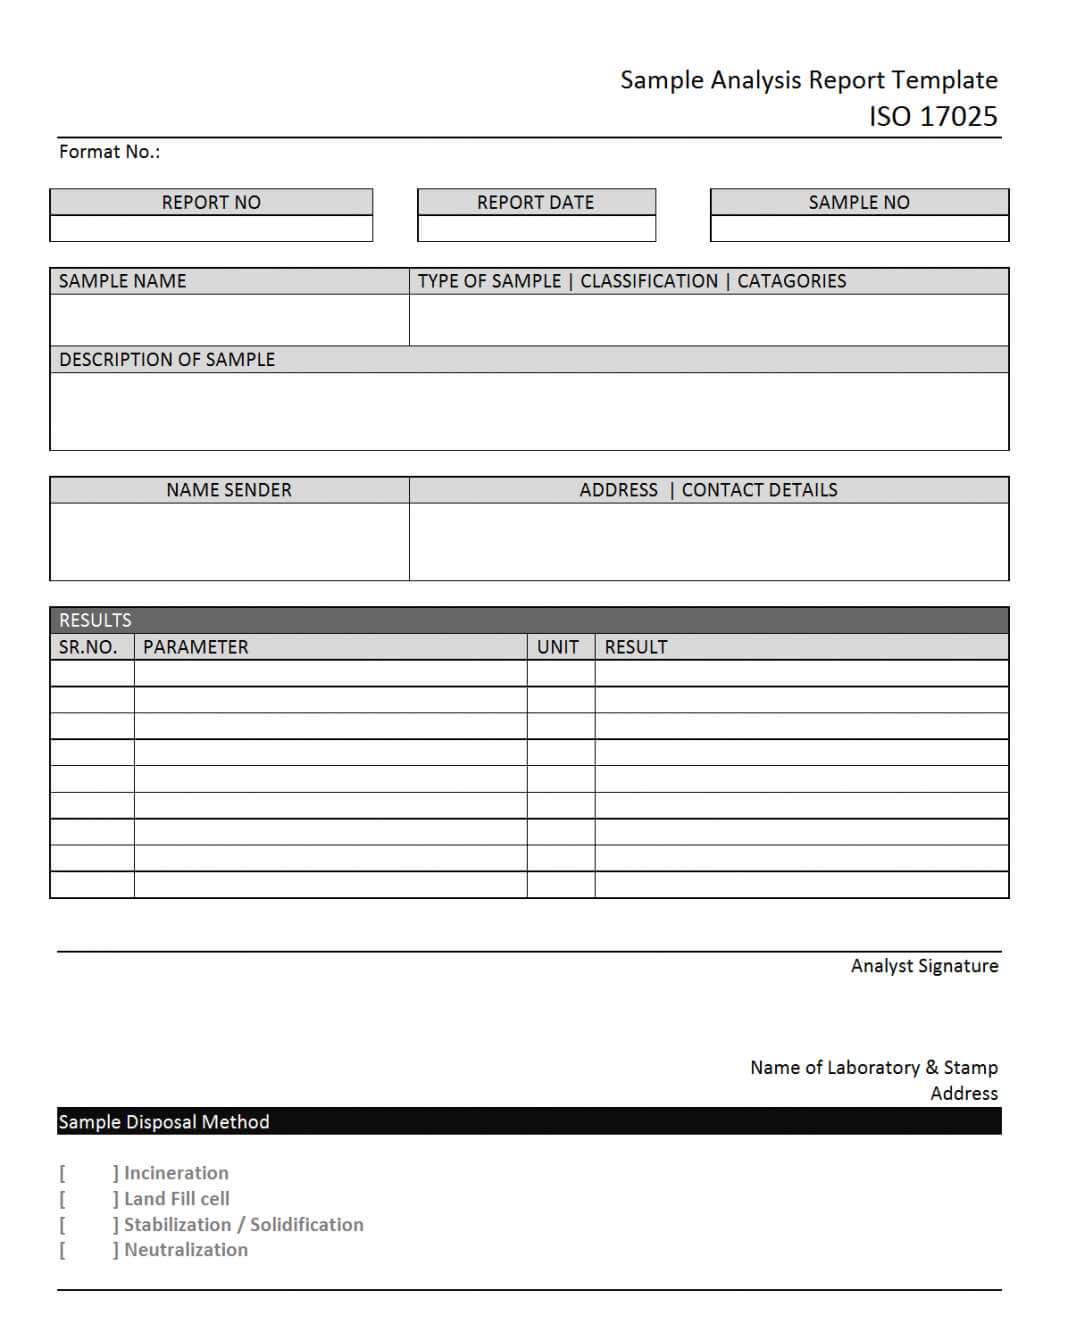 Sample Analysis Report Template Data Credit Example Equity With Regard To Stock Analysis Report Template